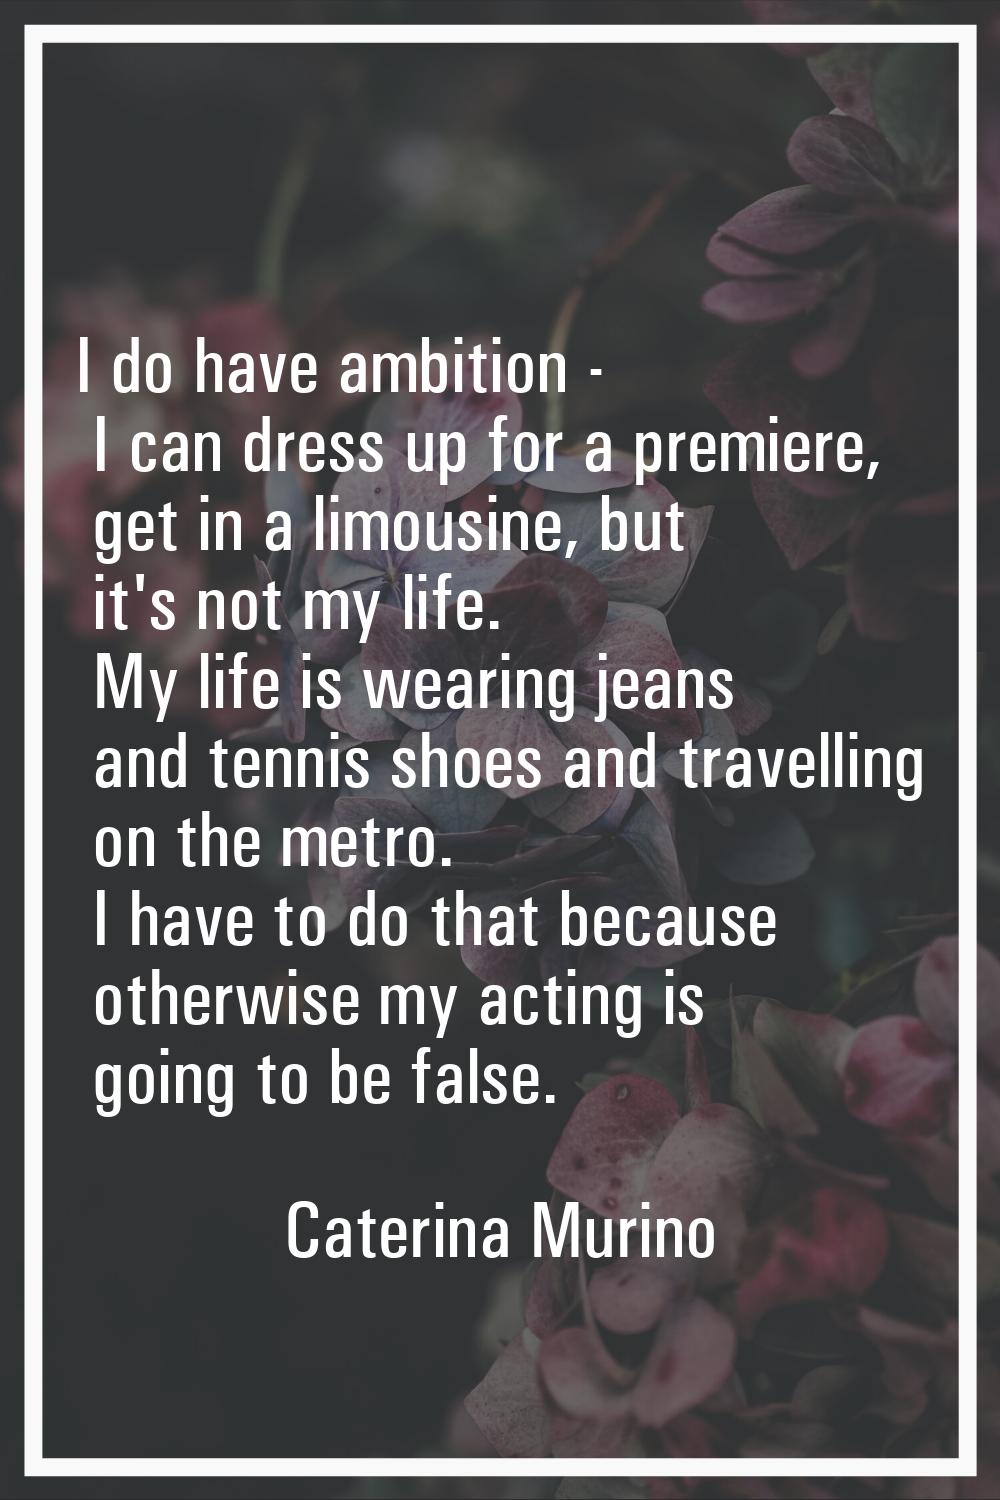 I do have ambition - I can dress up for a premiere, get in a limousine, but it's not my life. My li